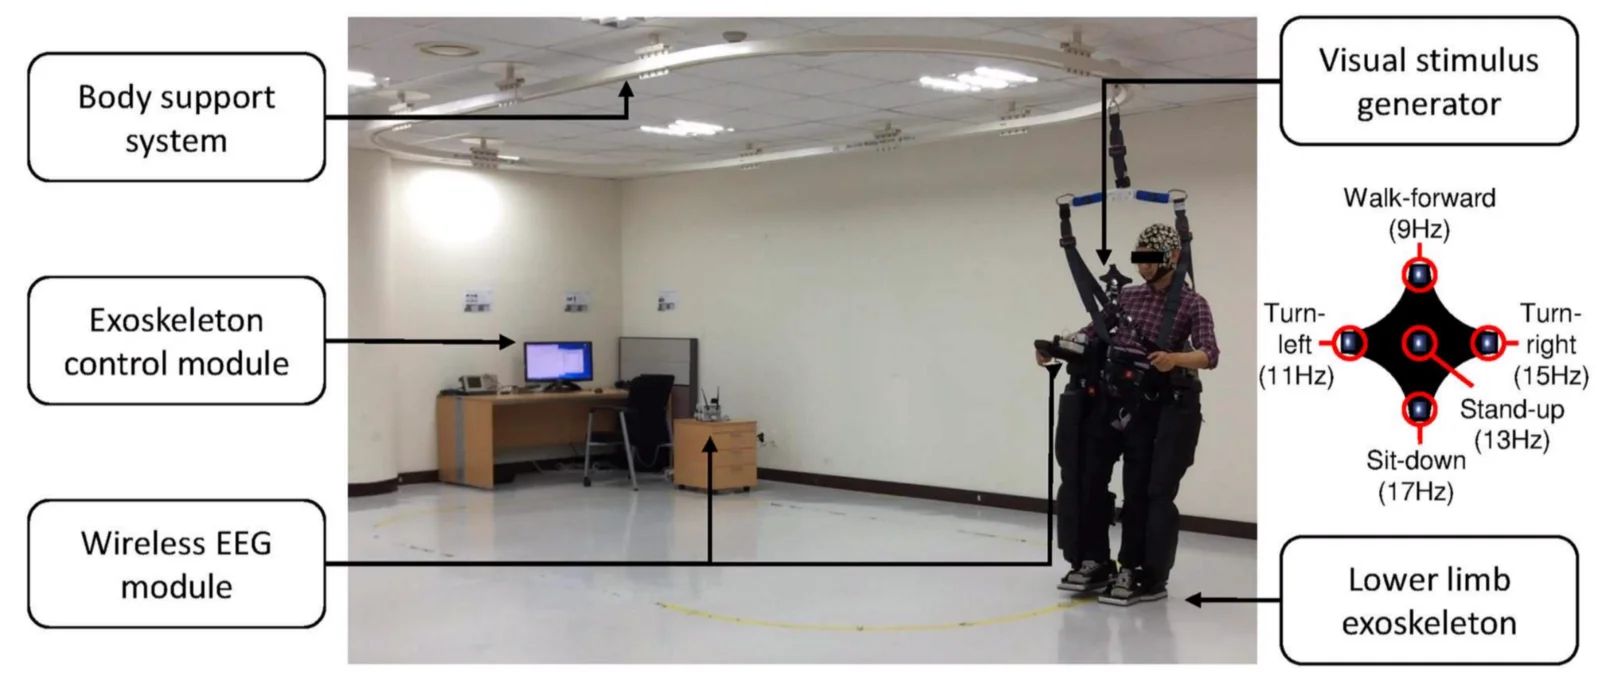 Subject wearing the exoskeleton and focusing on an LED from the visual stimulus generator [taken from [paper](https://journals.plos.org/plosone/article?id=10.1371/journal.pone.0172578)]